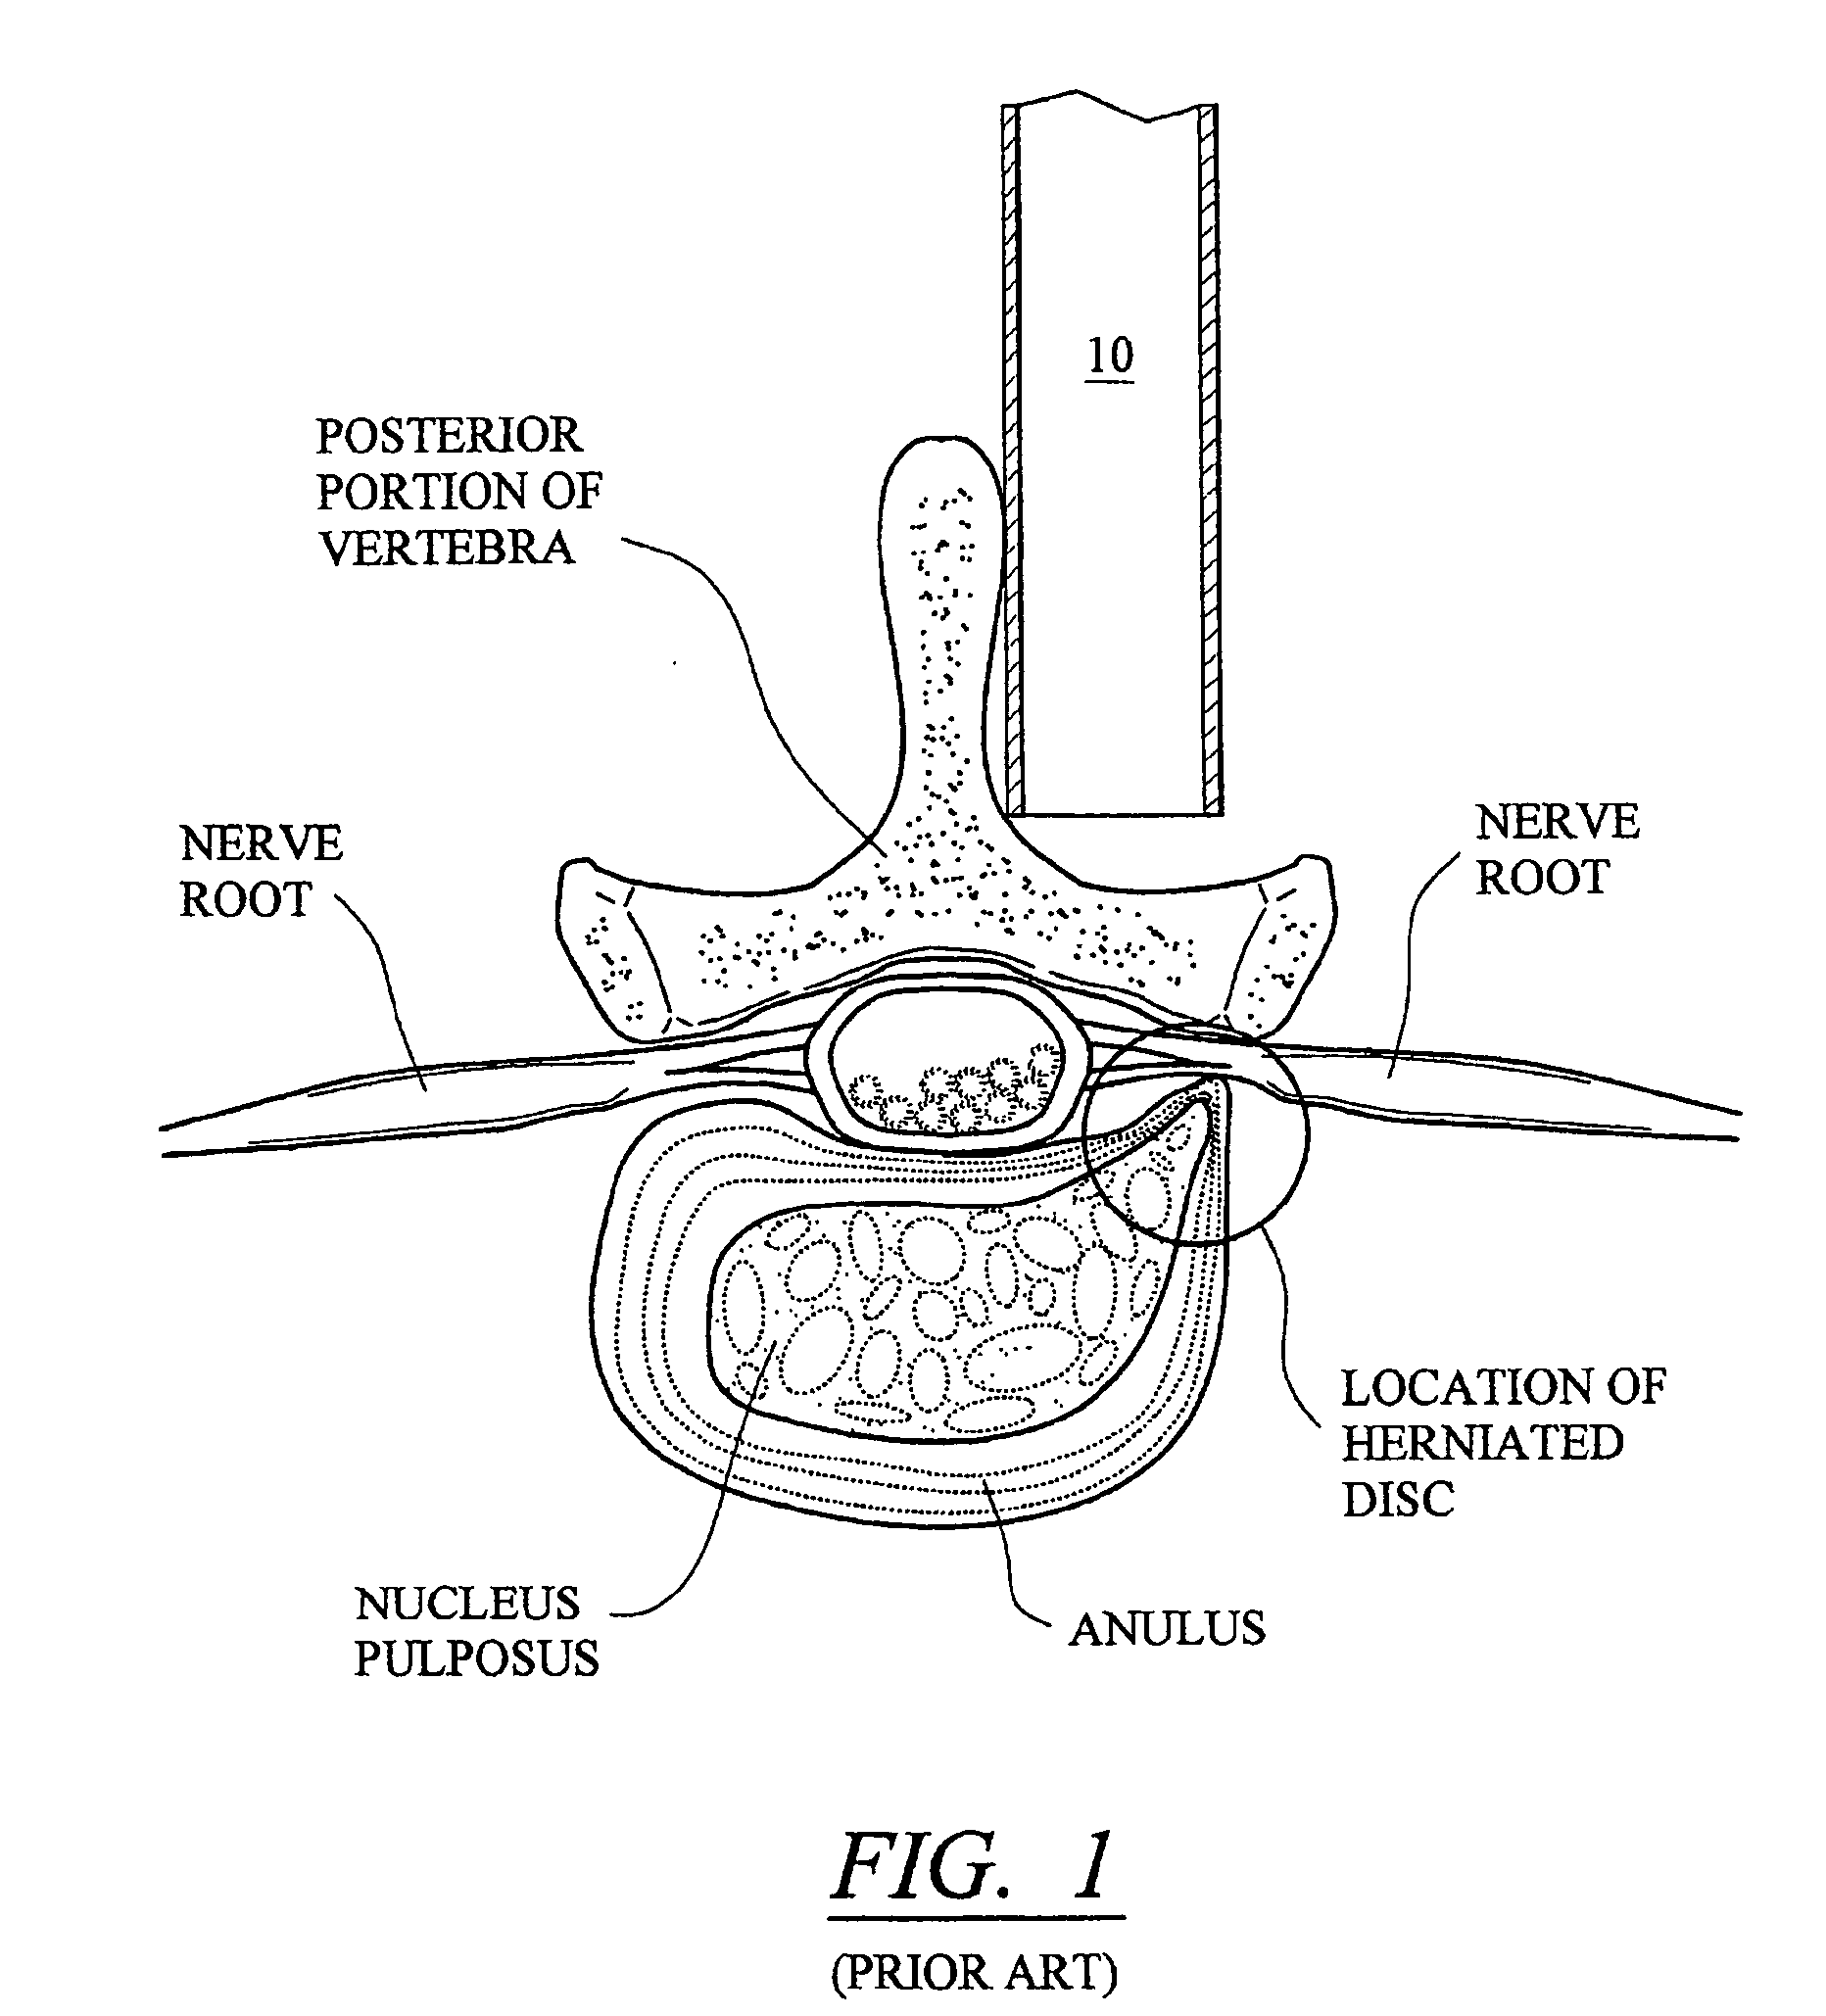 Configured and sized cannula